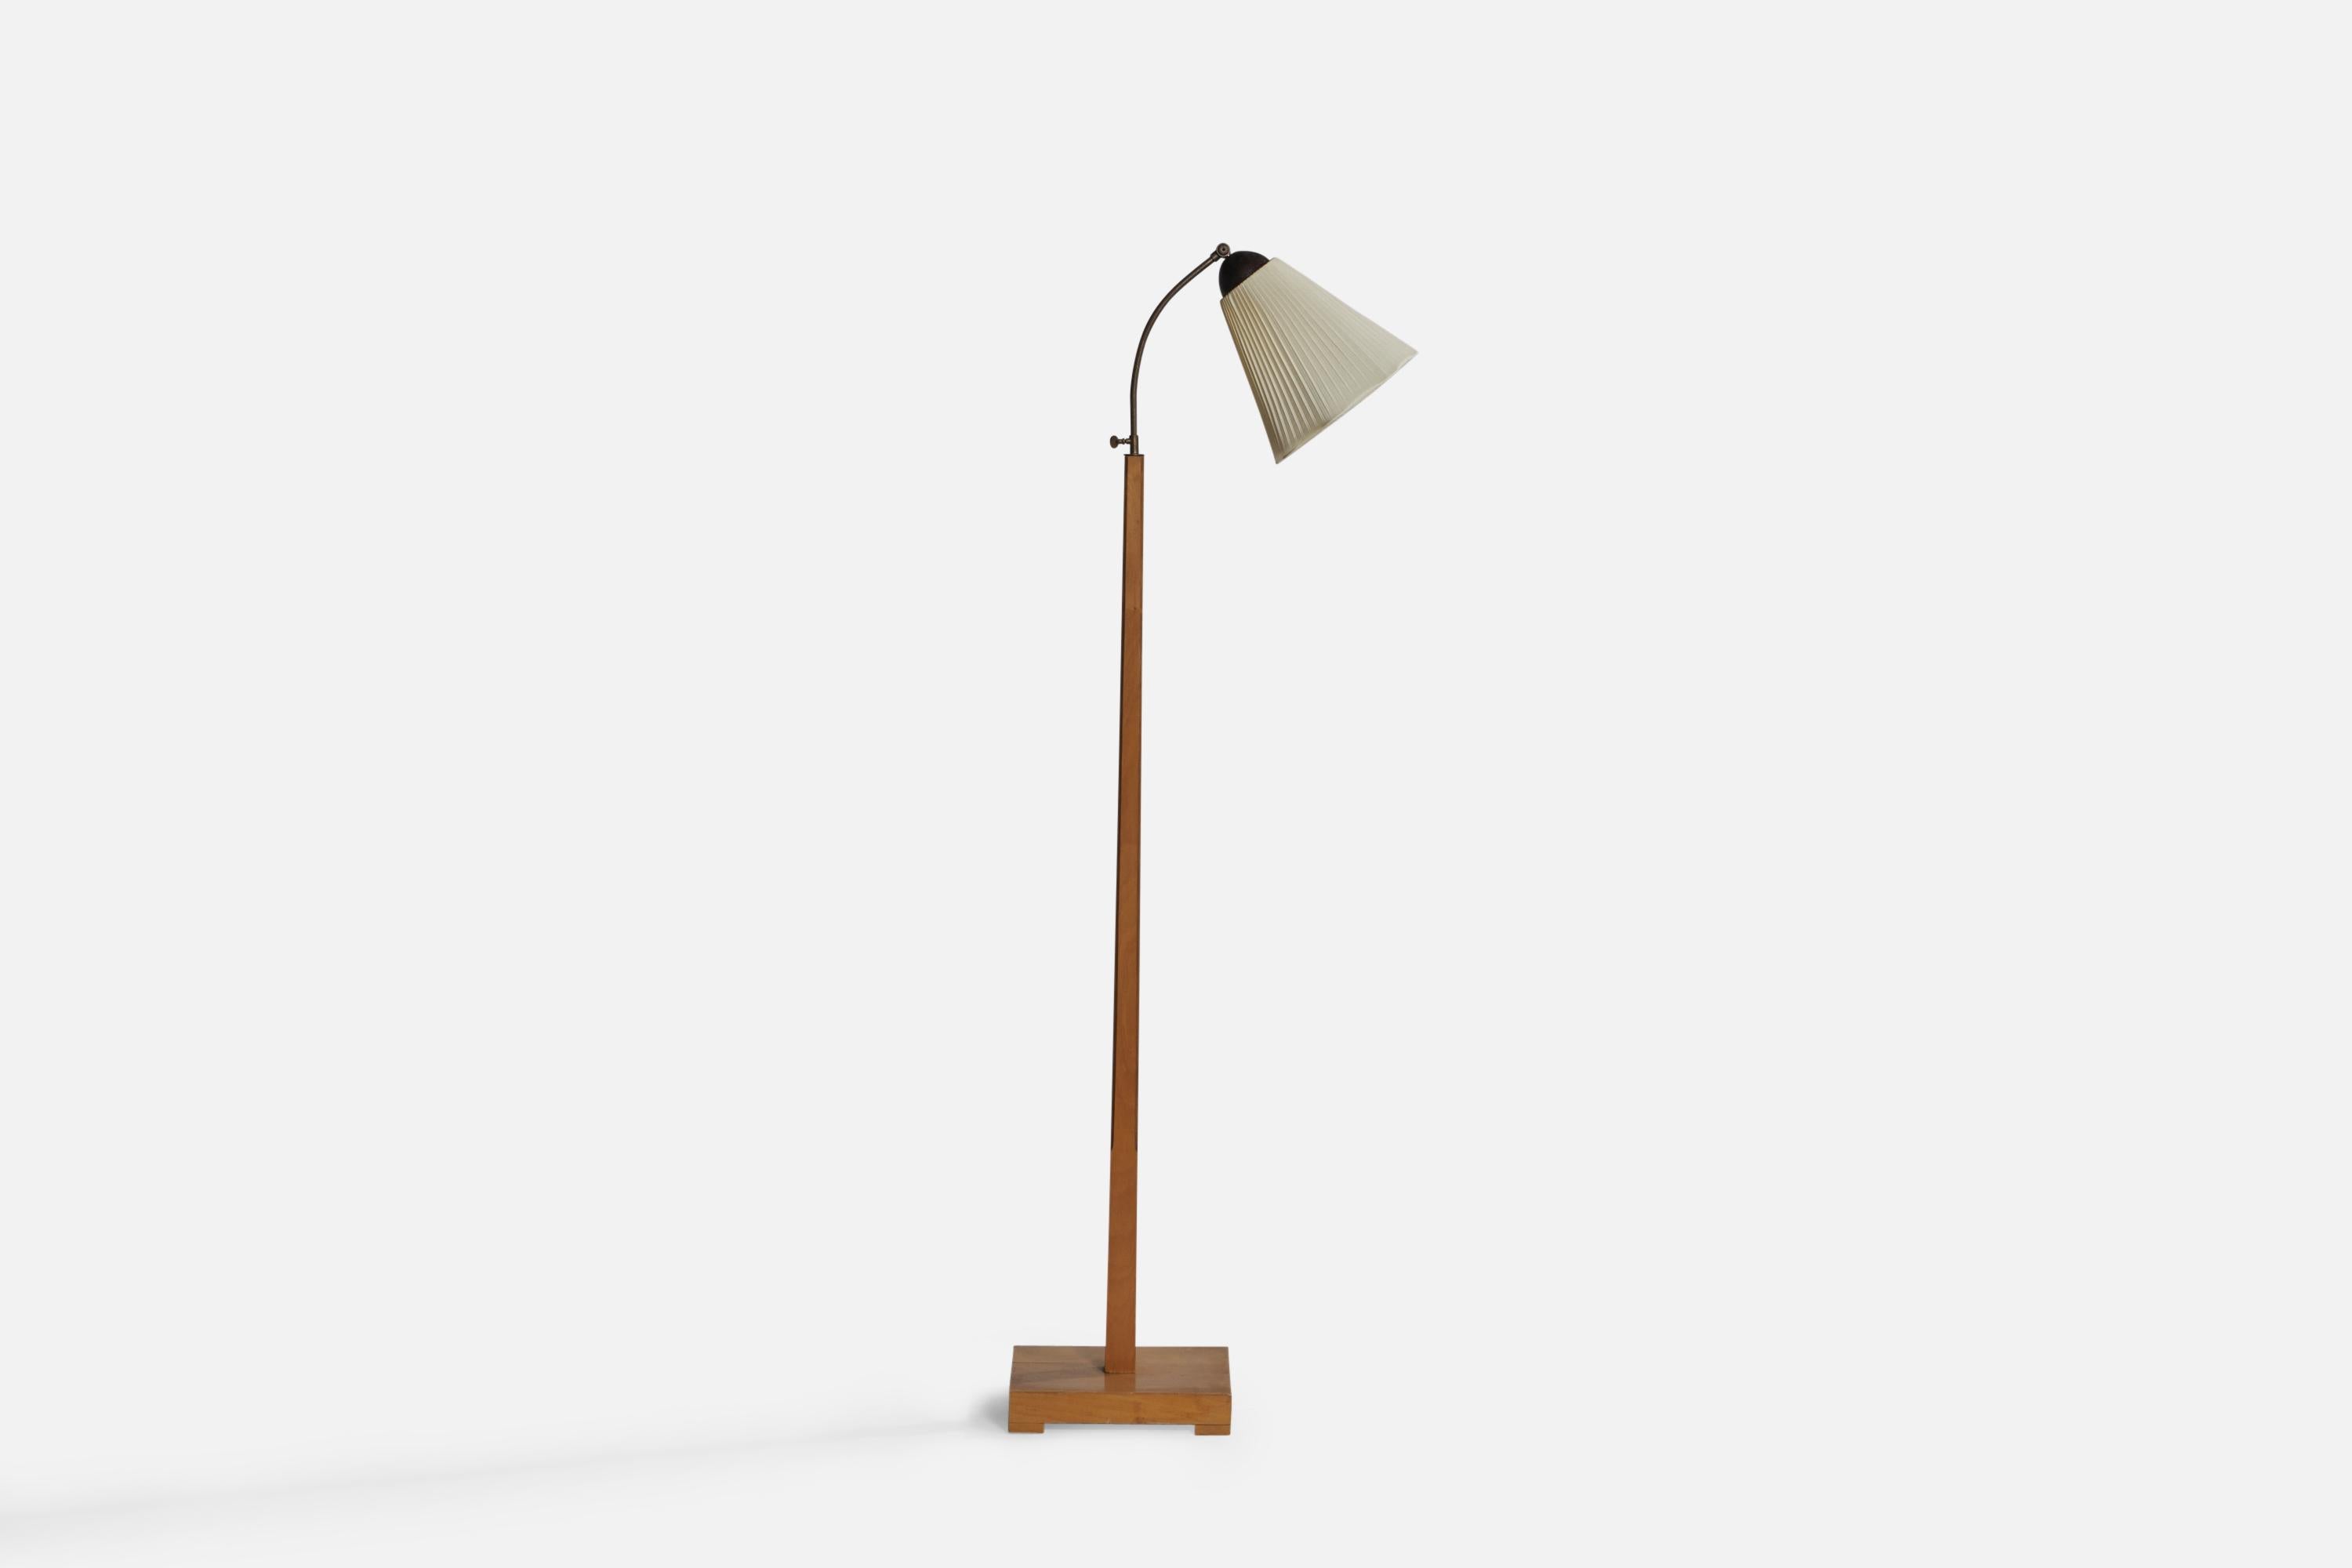 An adjustable brass, wood and off-white fabric floor lamp designed and produced in Sweden, 1930s.

Overall Dimensions (inches): 58.8” H x 11.2” W 20.9” D. Stated dimensions include shade.
Dimensions vary based on position of light.
Bulb